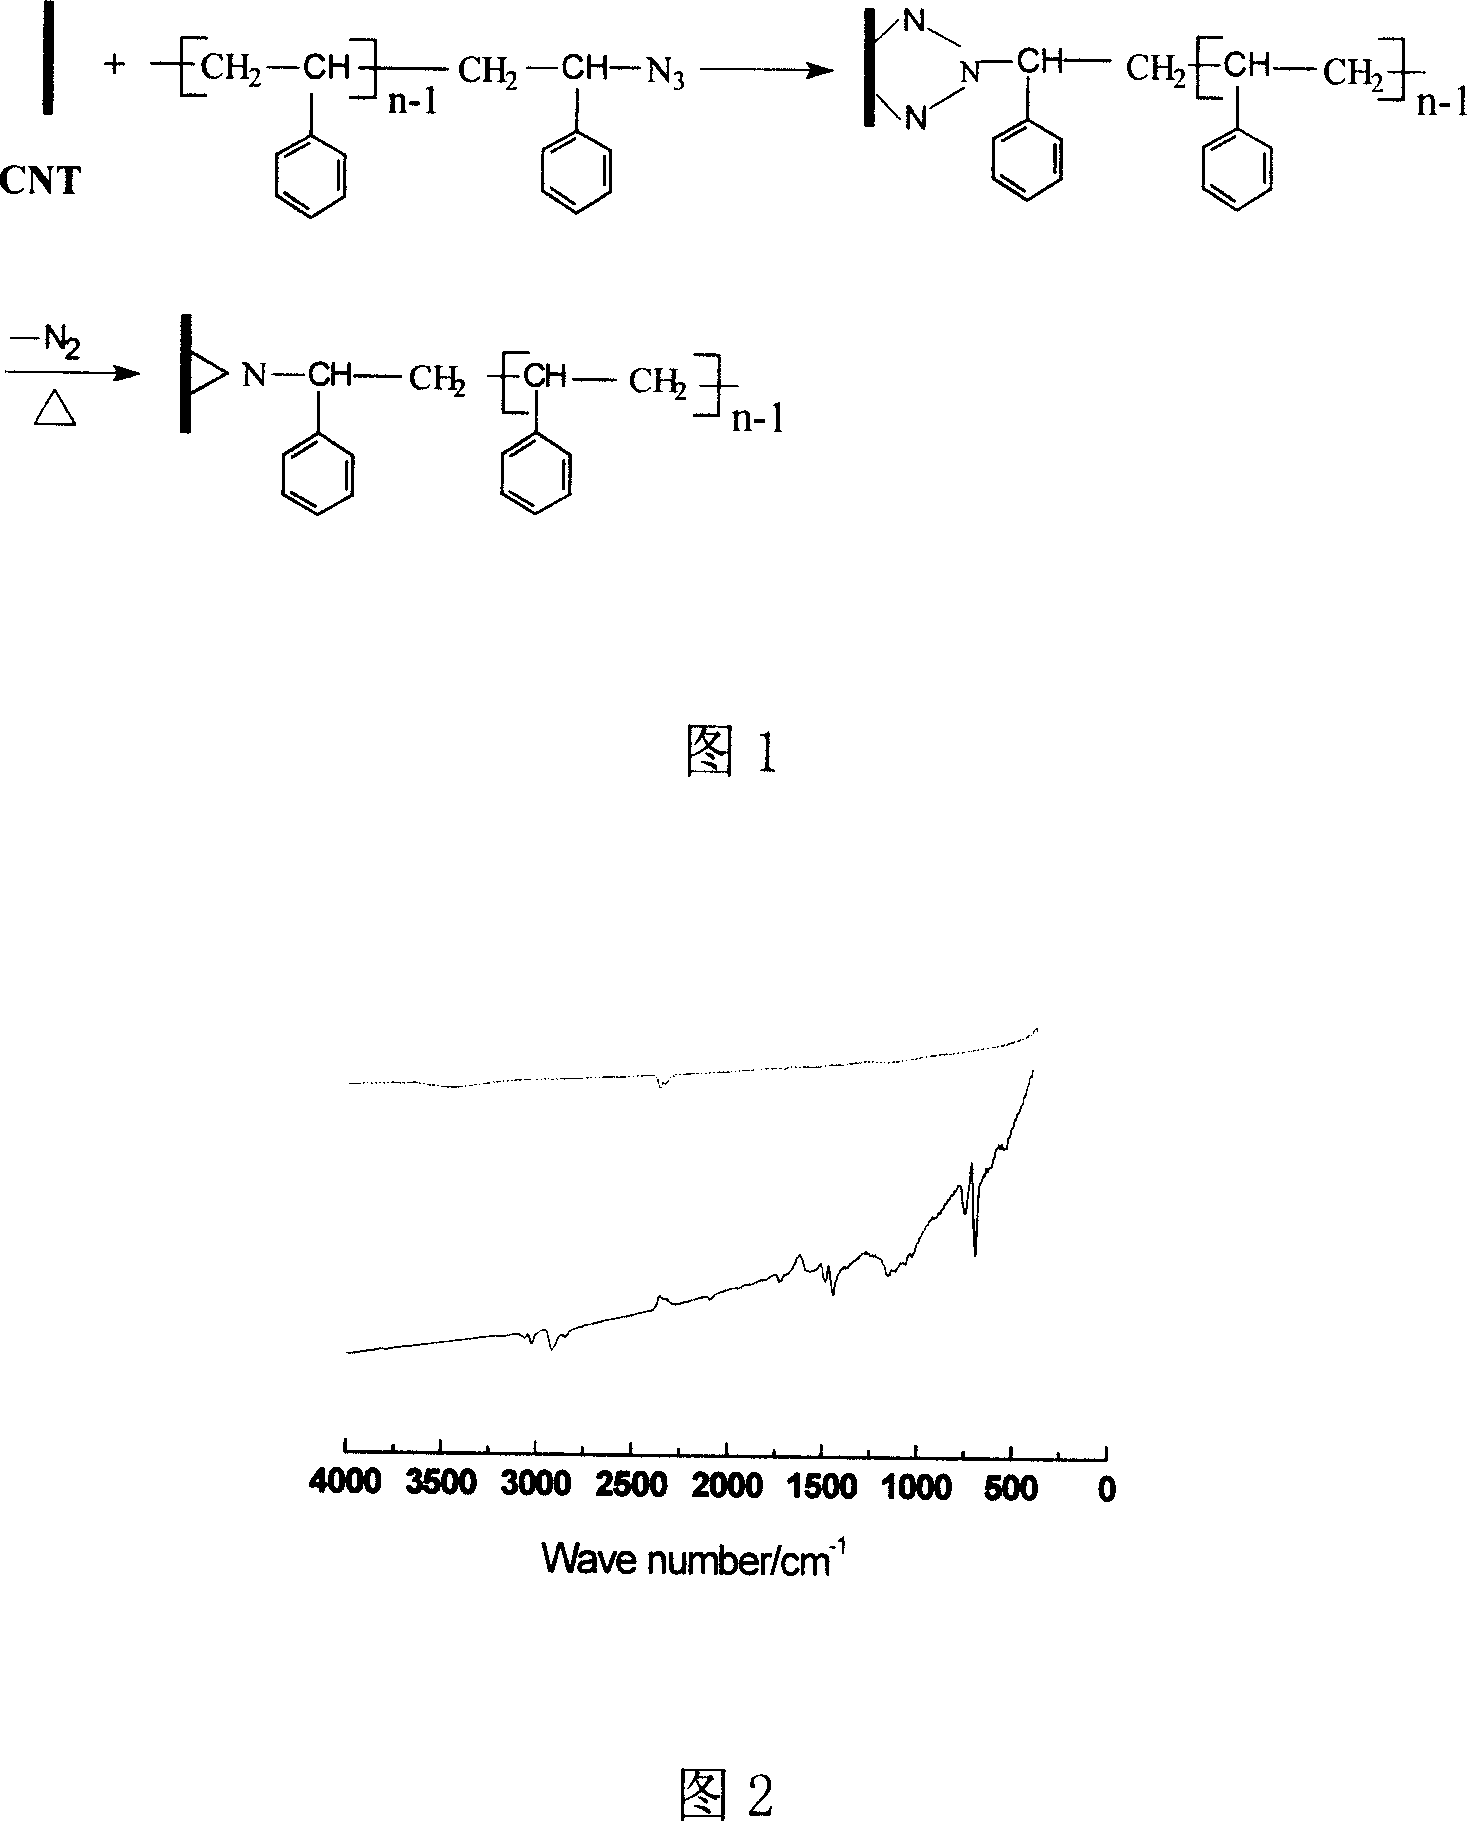 Preparation for polymer and method for chemically modifying carbon nano-tube